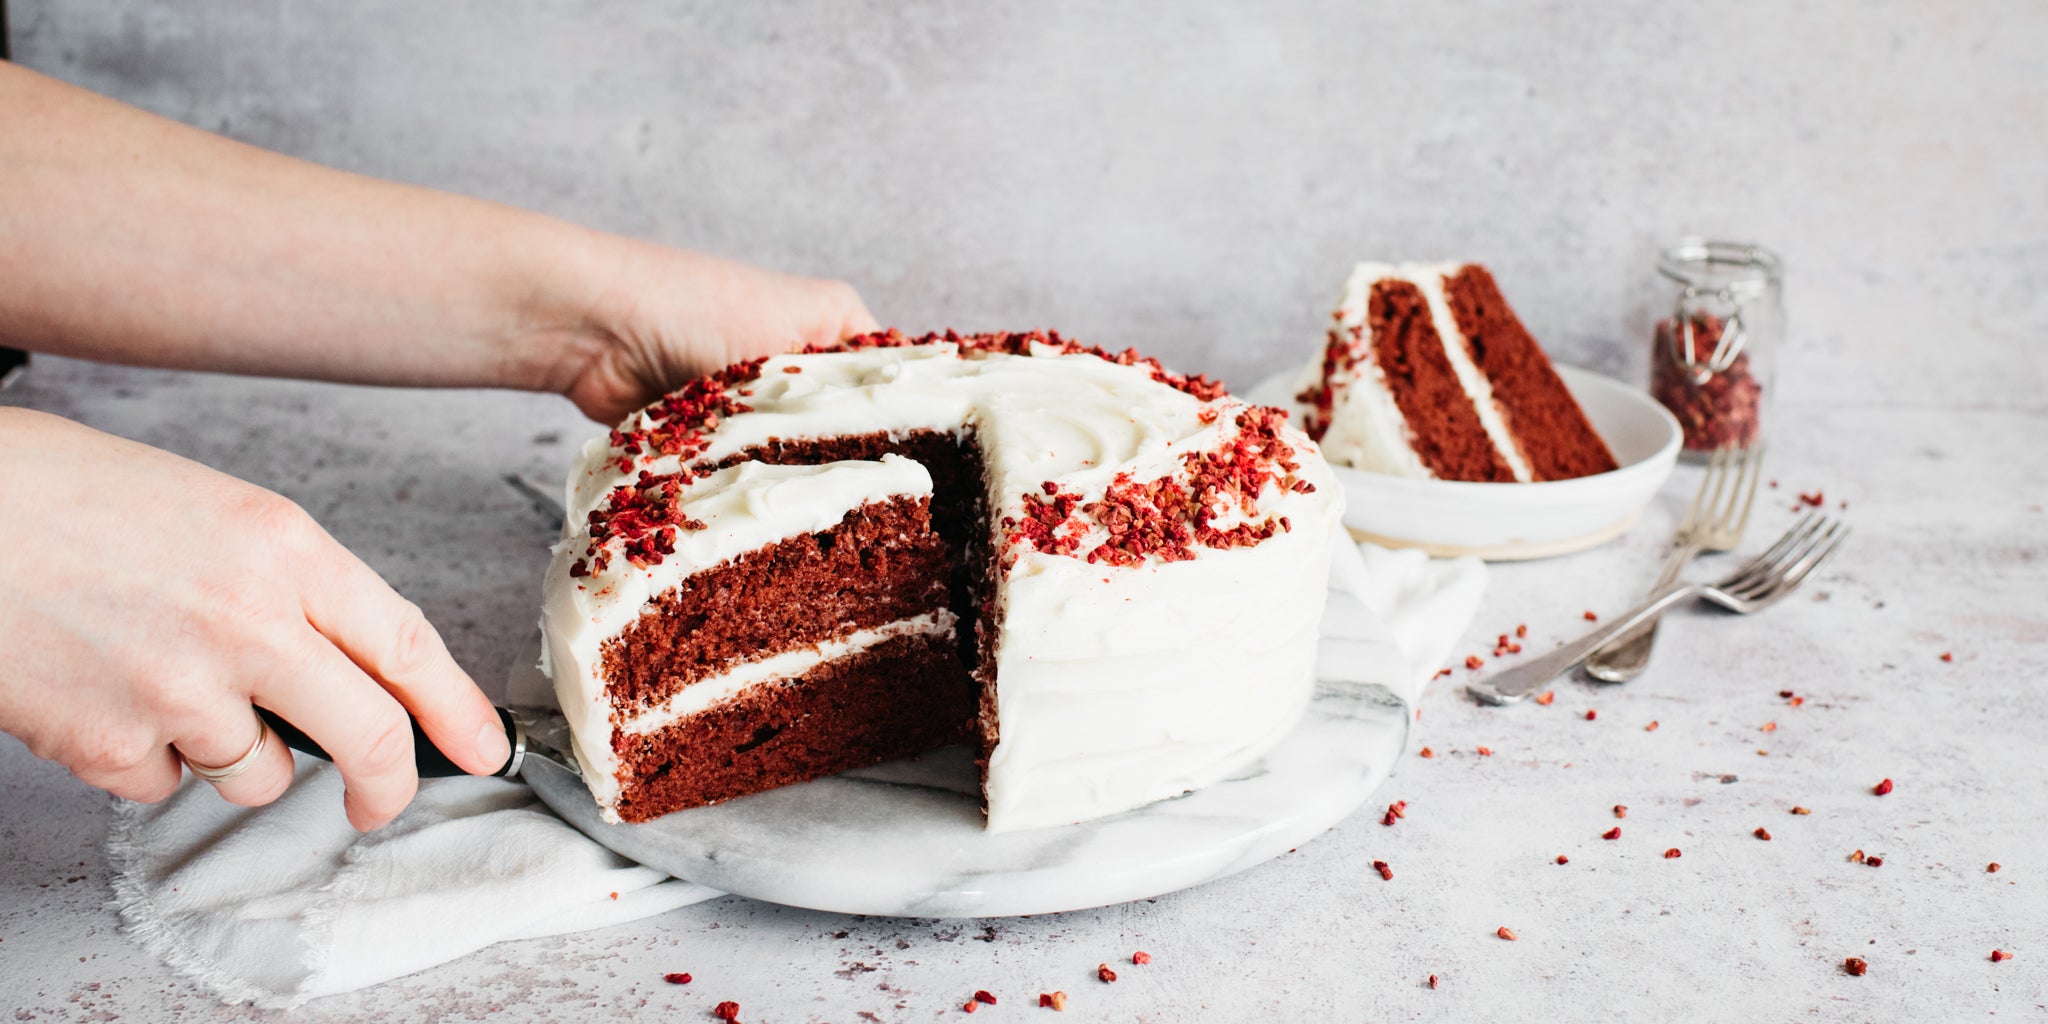 Hand reaching for a slice of Red Velvet Cake using a cake knife to serve